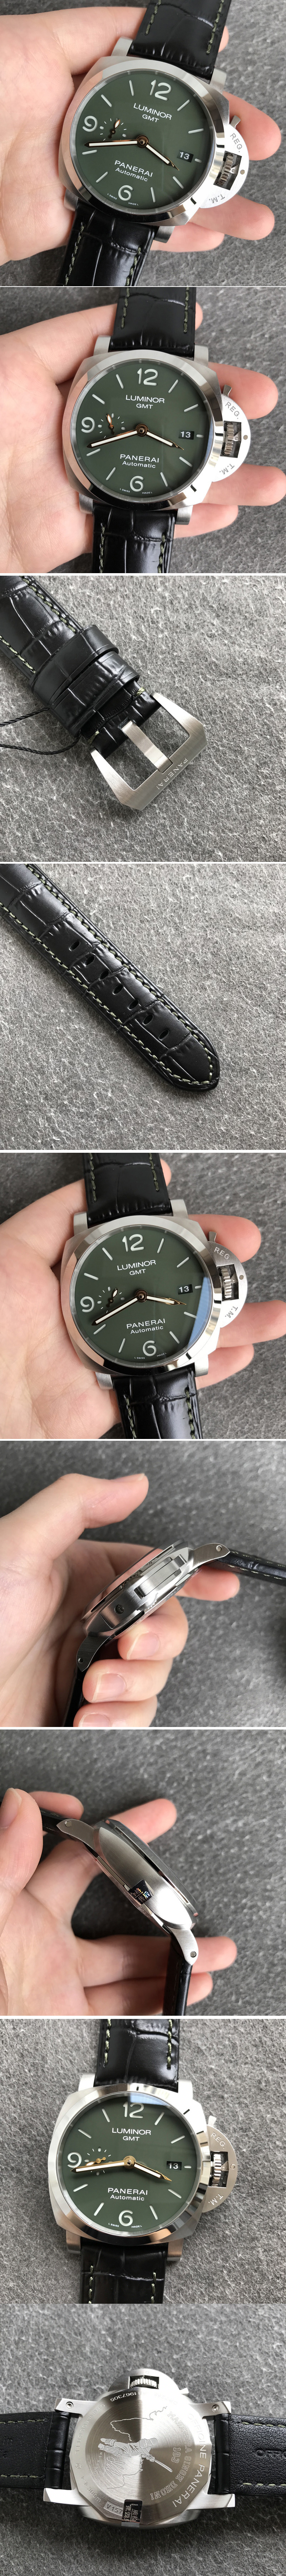 Replica Panerai PAM1056 V GMT VSF 1:1 Best Edition Green Dial on Black Leather Strap P.9011 Super Clone